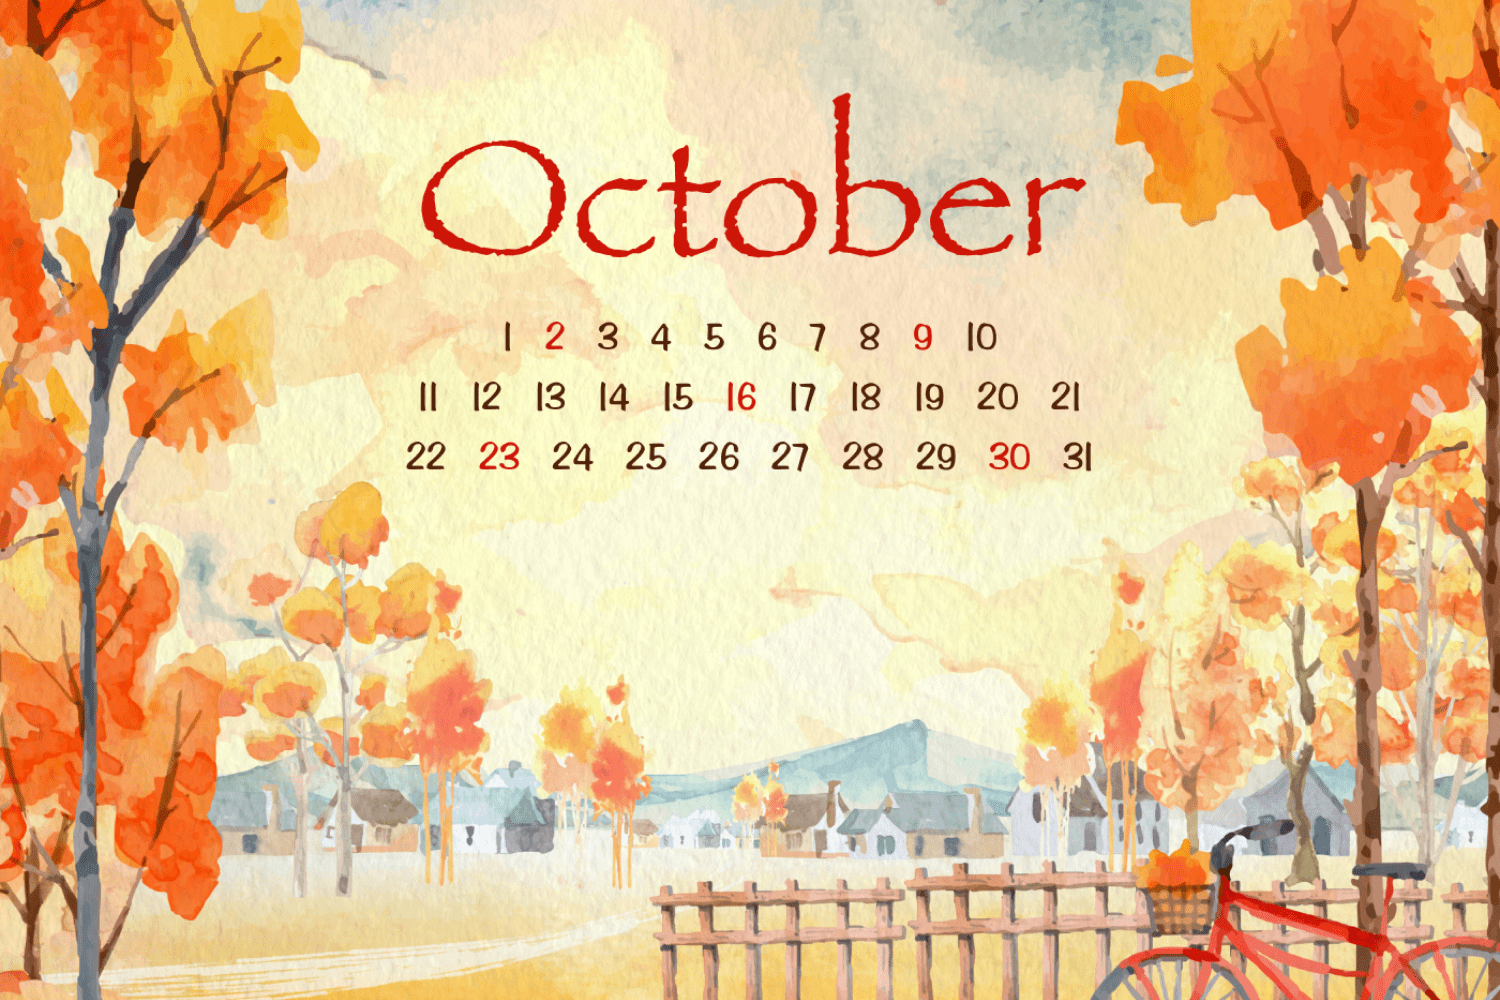 Calendar for October with a painted village in autumn colors.